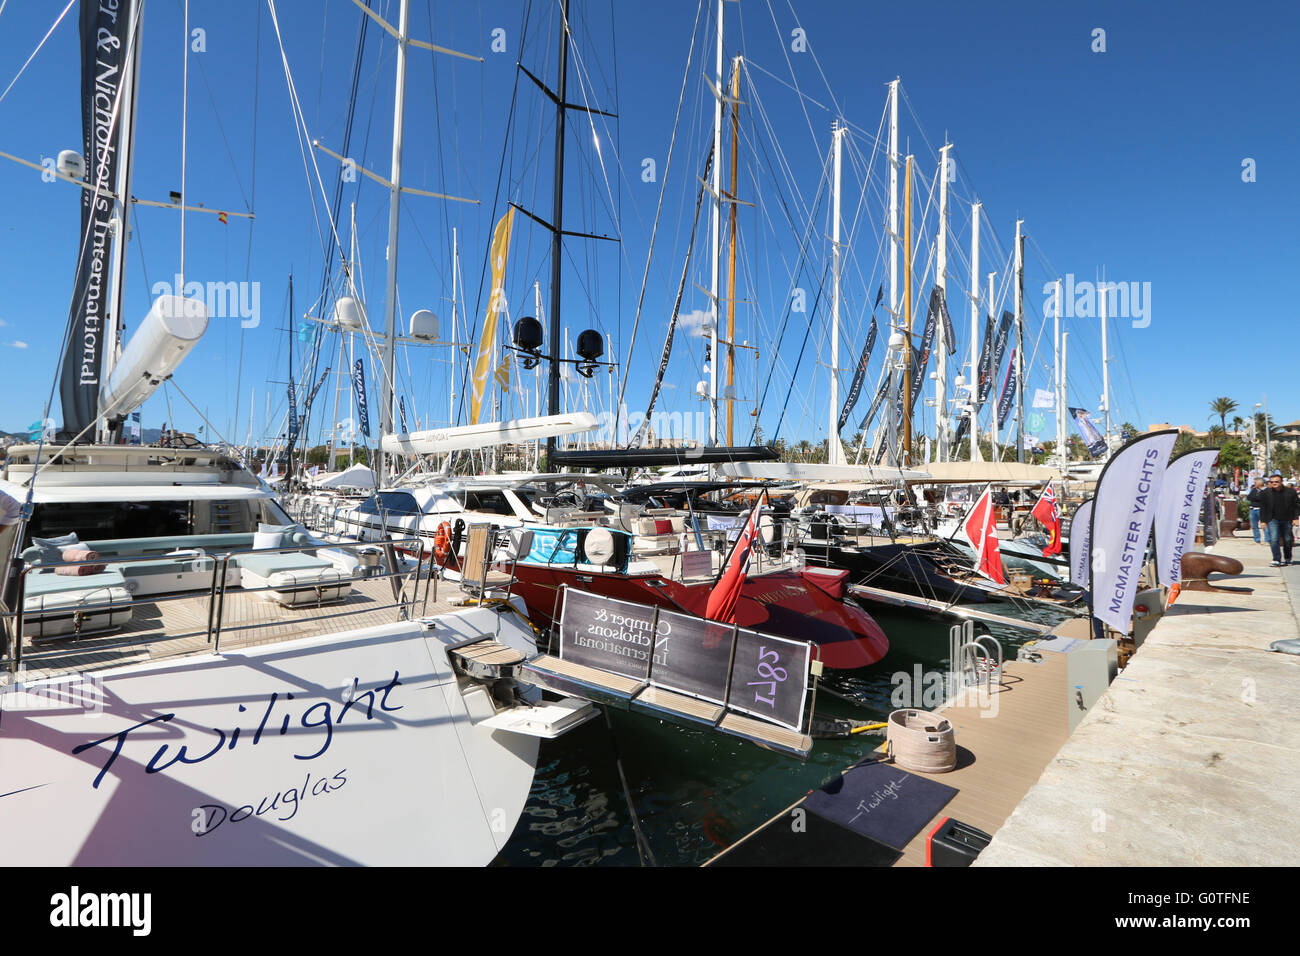 Images of Palma International Boat Show 2016 and Palma Superyacht Show 2016 - luxury sailing superyachts - Moll Vell / Old Port Stock Photo